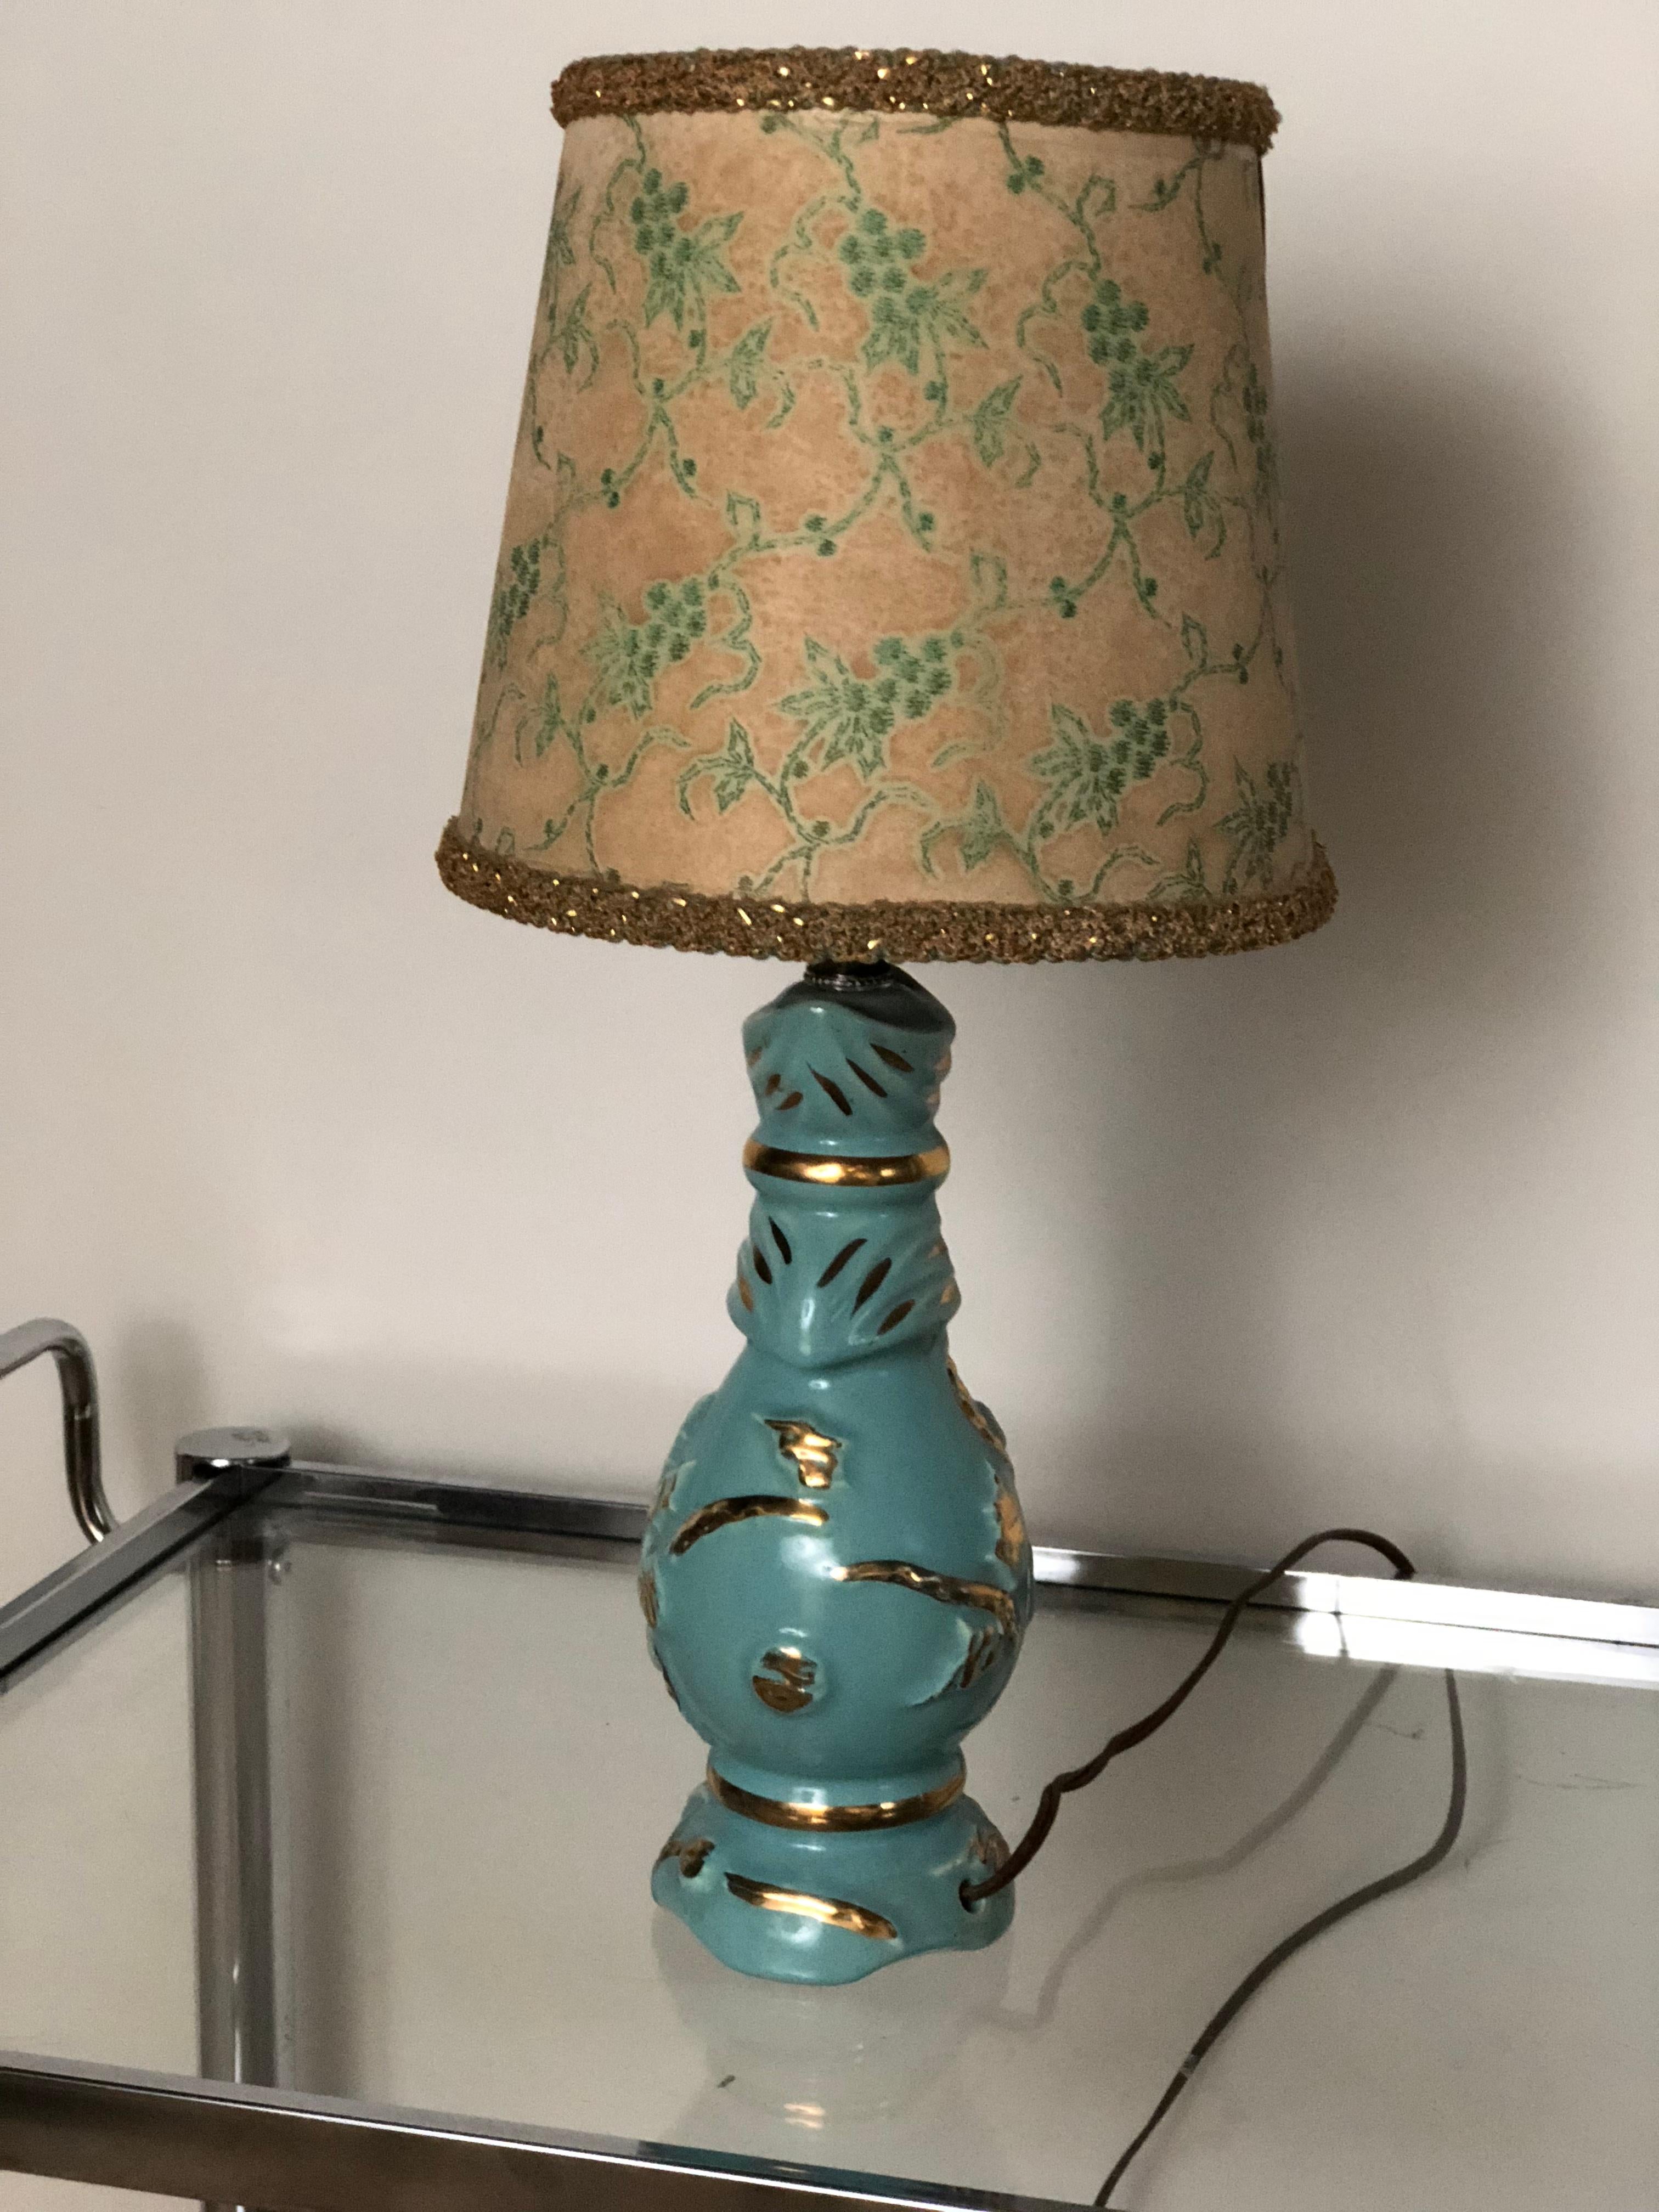 A Classic 1960s petite midcentury ceramic lamp in turquoise with gold decorative accents. The lamp's original paper shade has turquoise floral motifs and gold foil trim around the top and bottom.